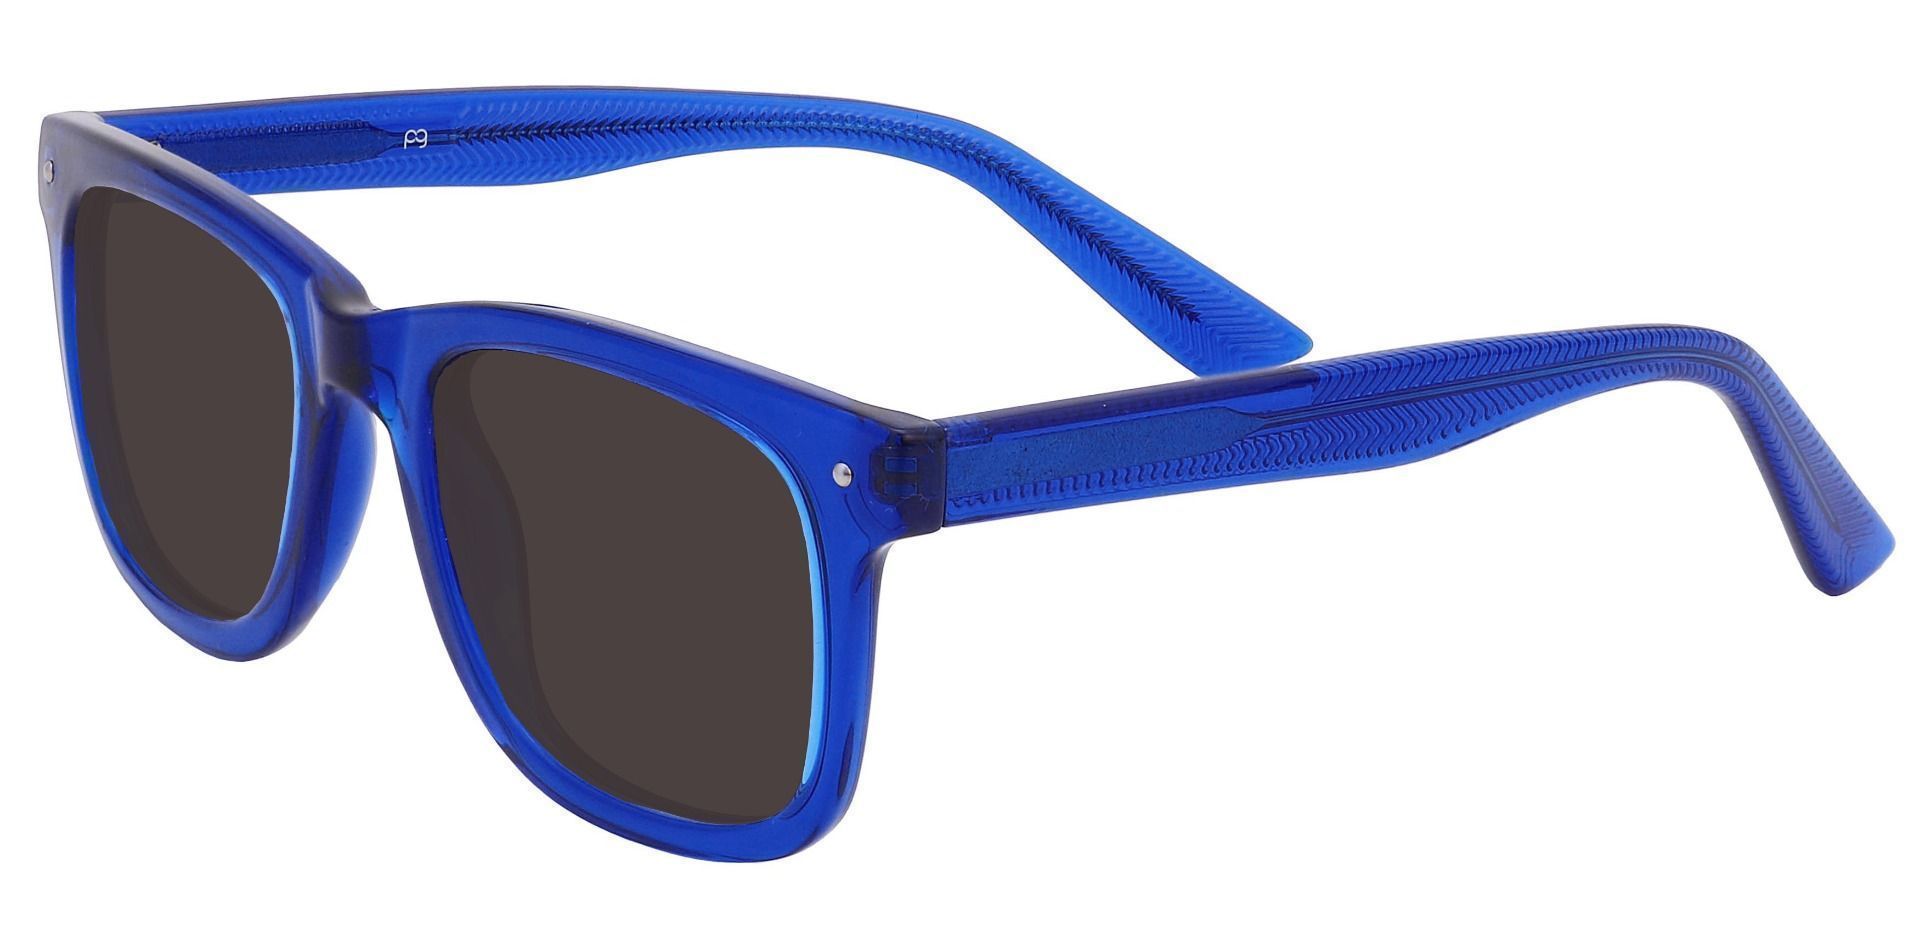 McKinley Square Non-Rx Sunglasses - Blue Frame With Gray Lenses